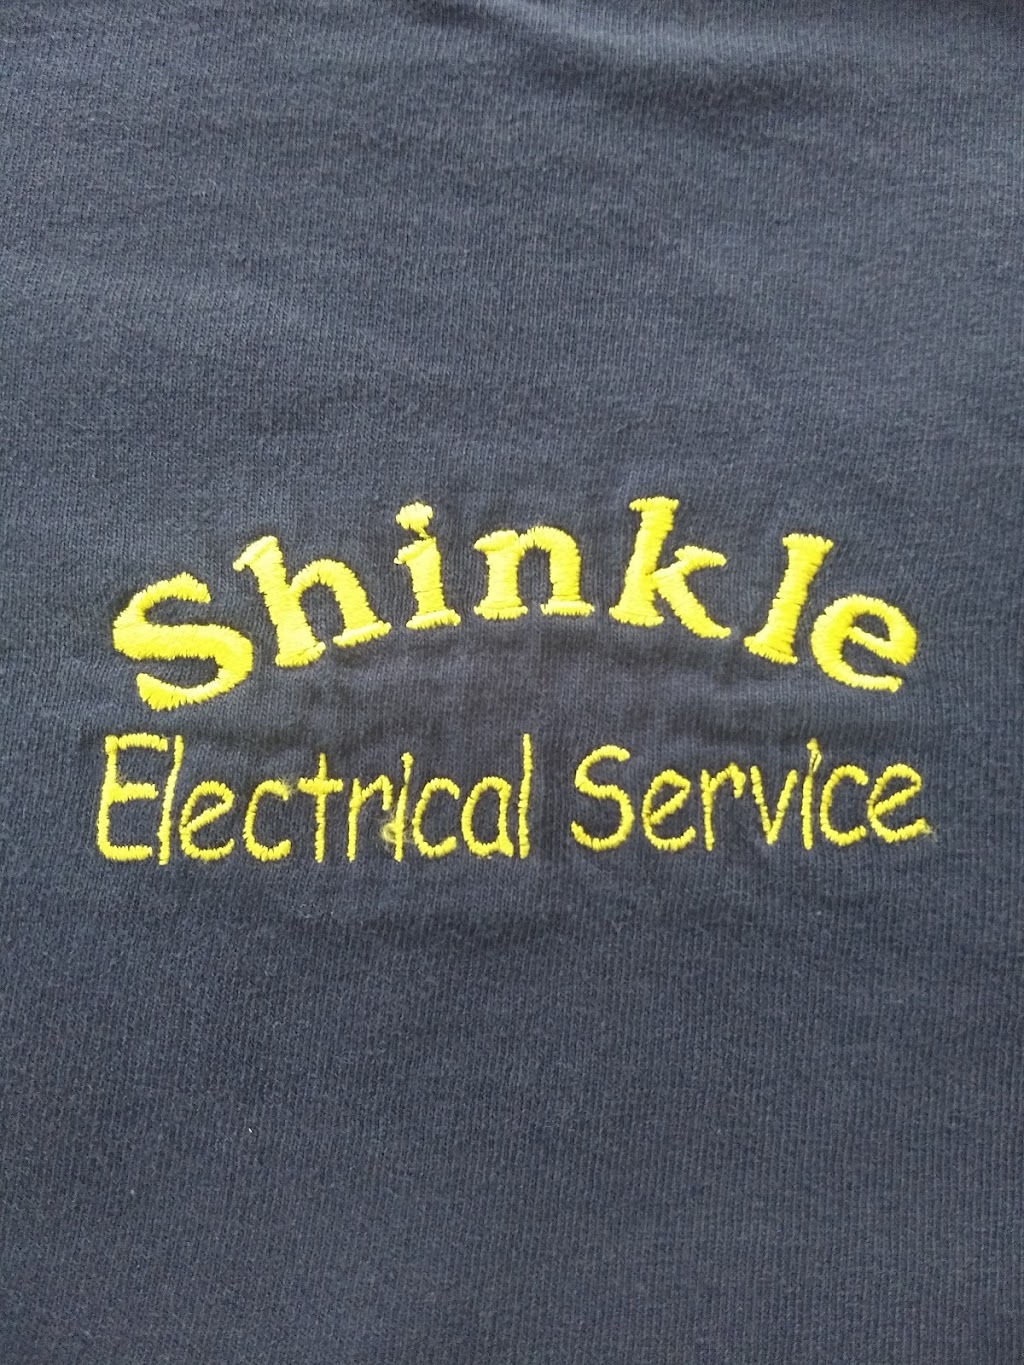 Shinkle Electrical Service | 947 Georgetown Rd, Swarthmore, PA 19081 | Phone: (610) 328-4183